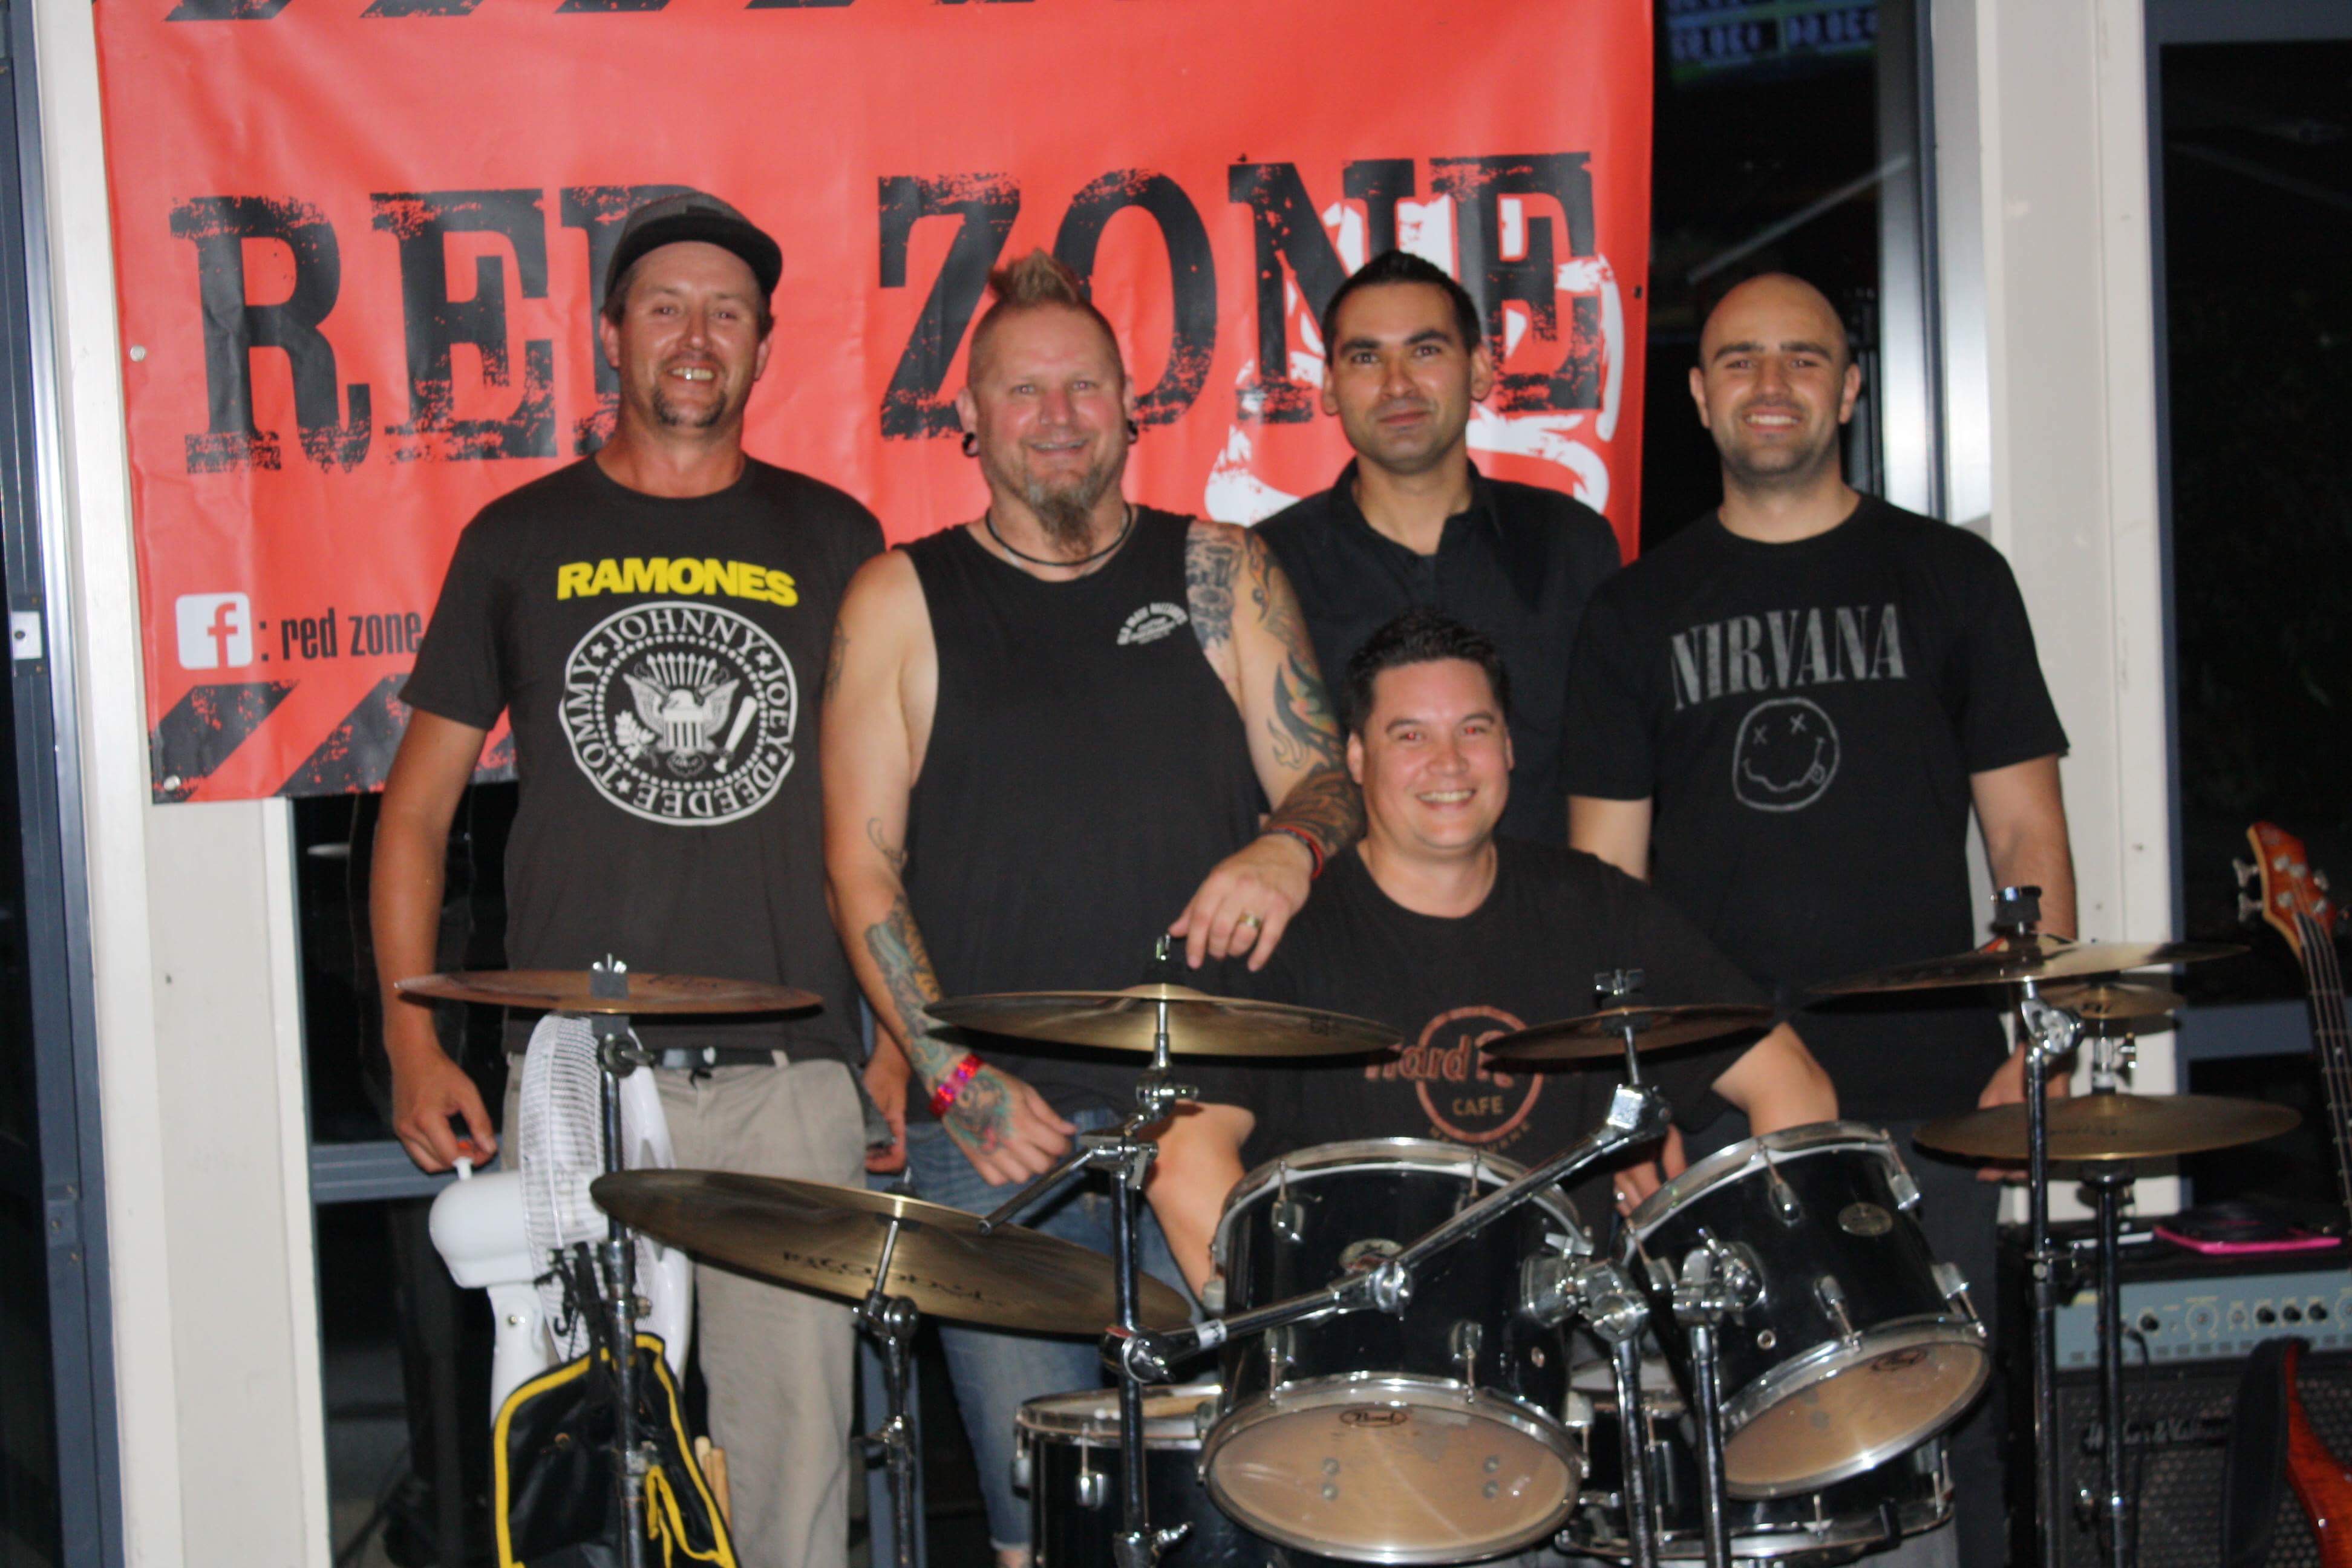 Christchurch covers band Red Zone